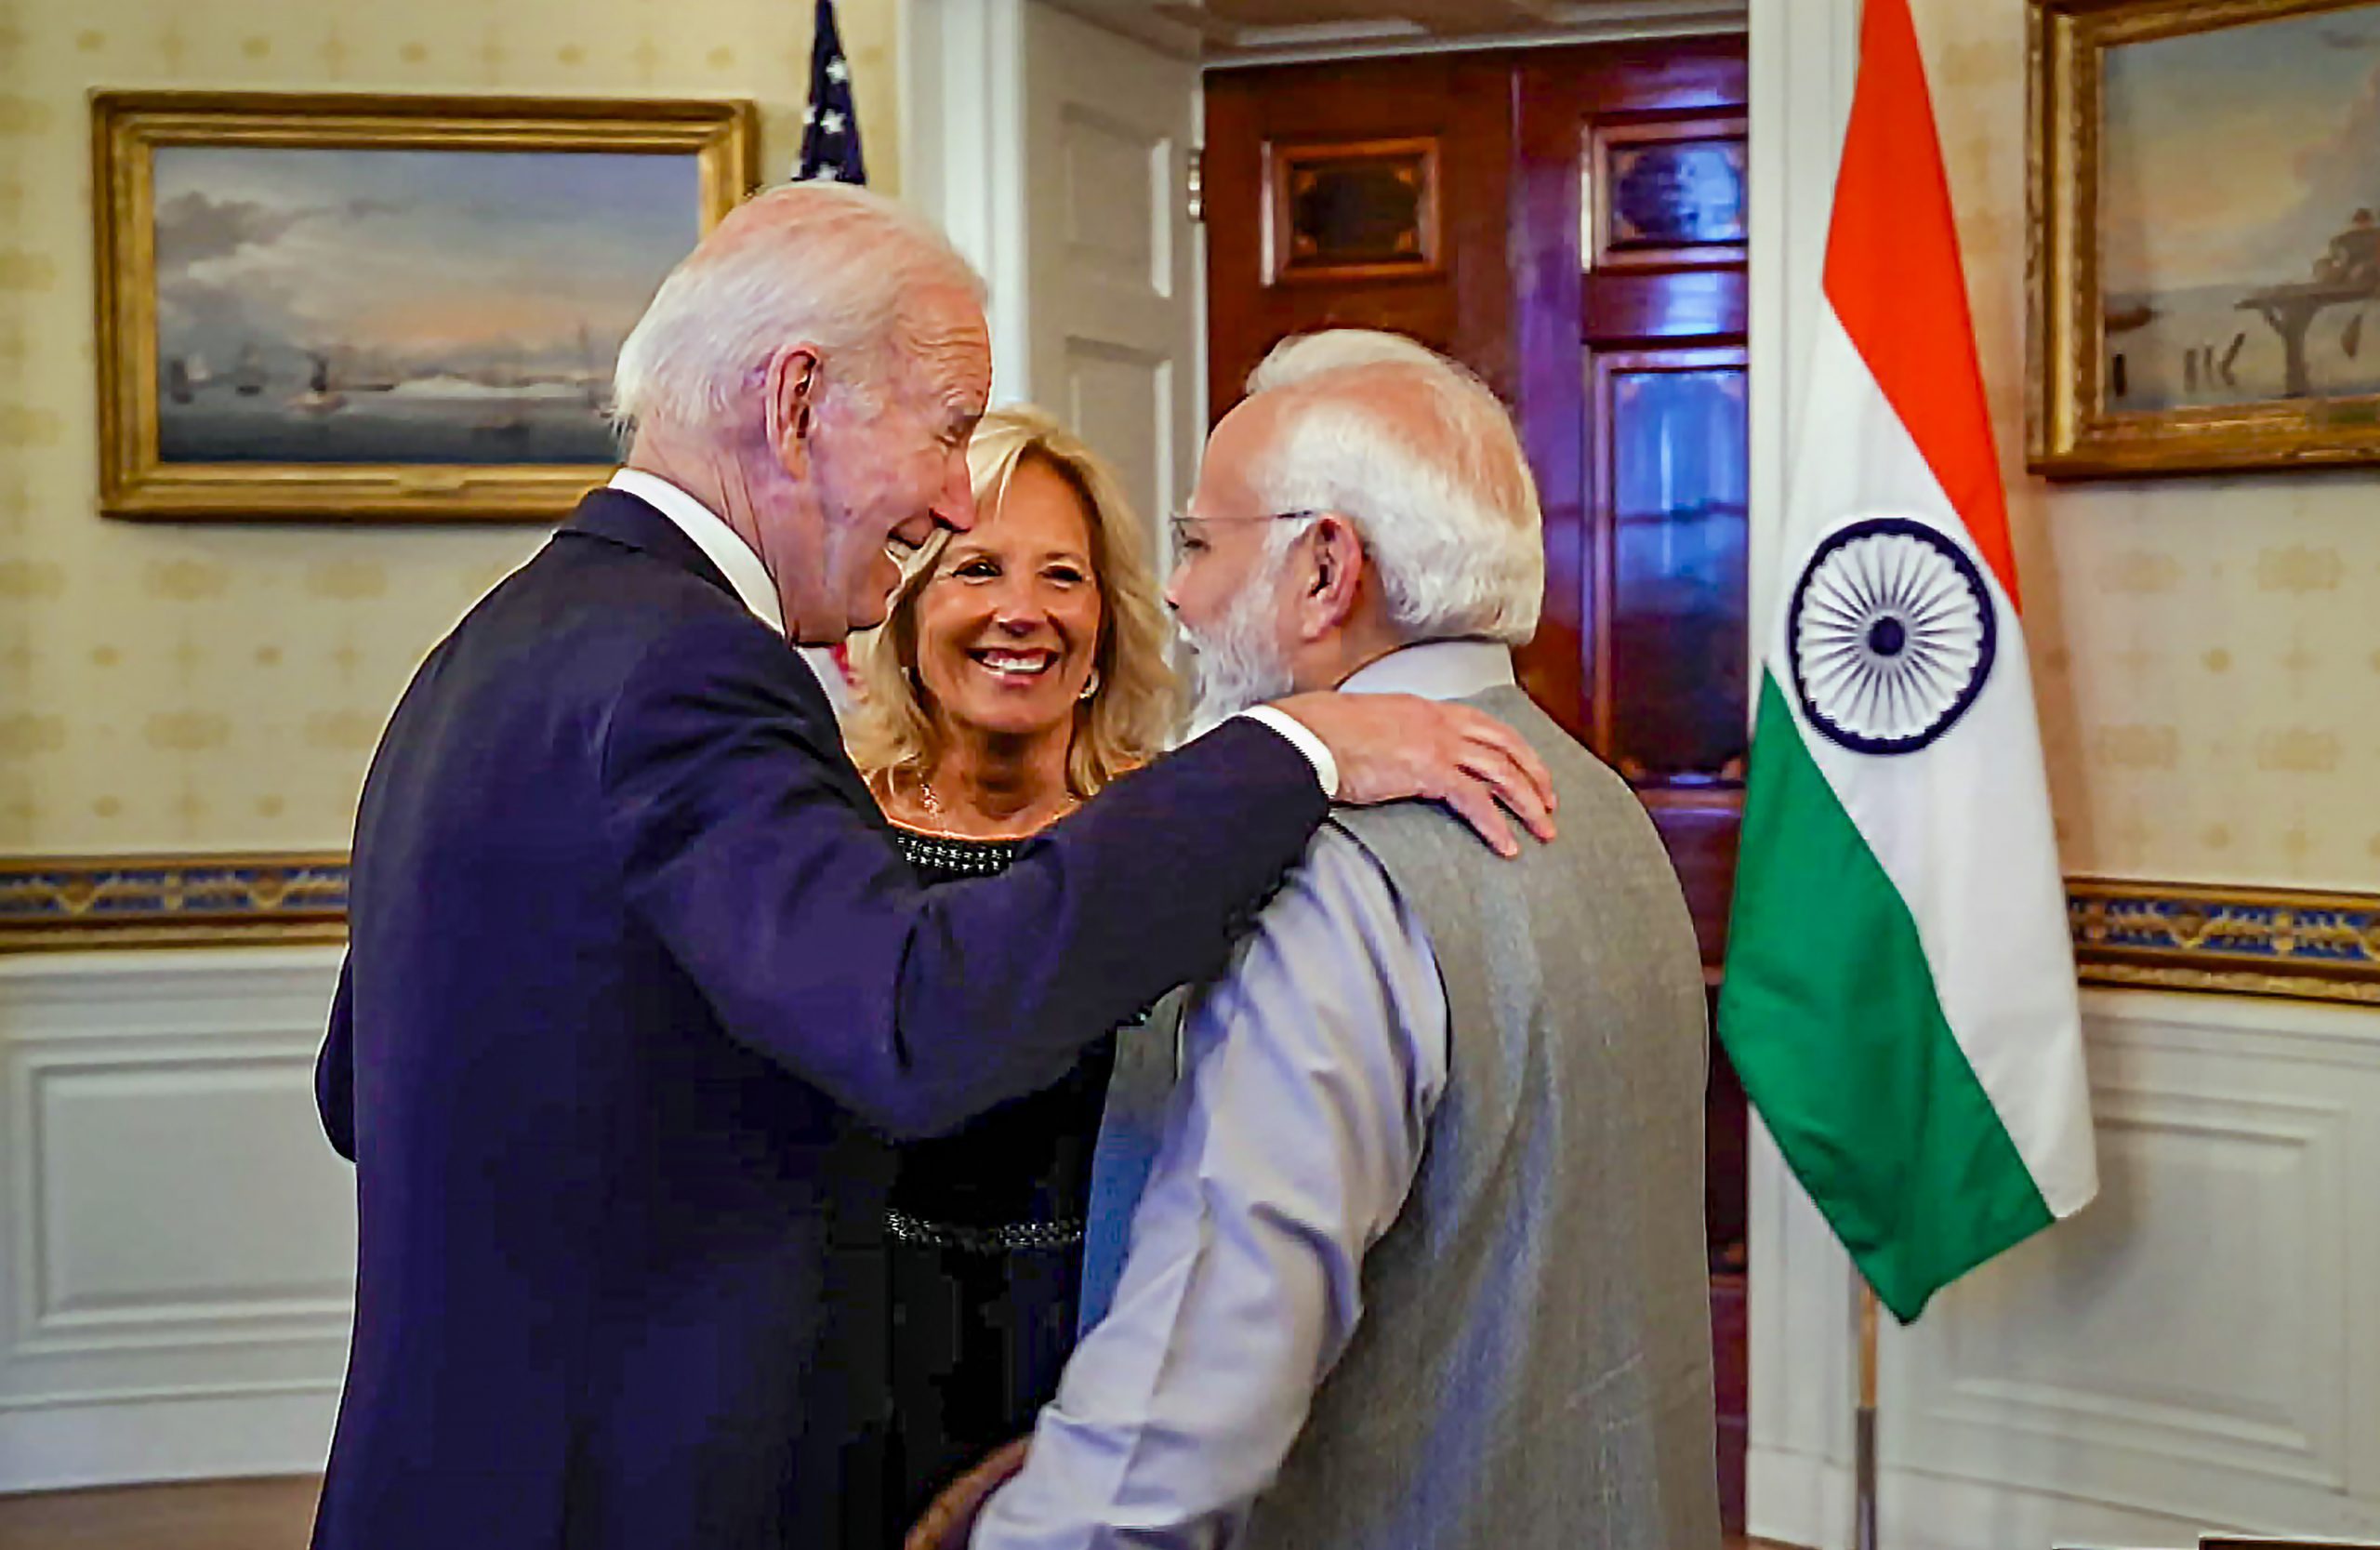 Modi’s gifts for Biden: Ganesh in a sandalwood box and Yeats translation of ancient Indian text